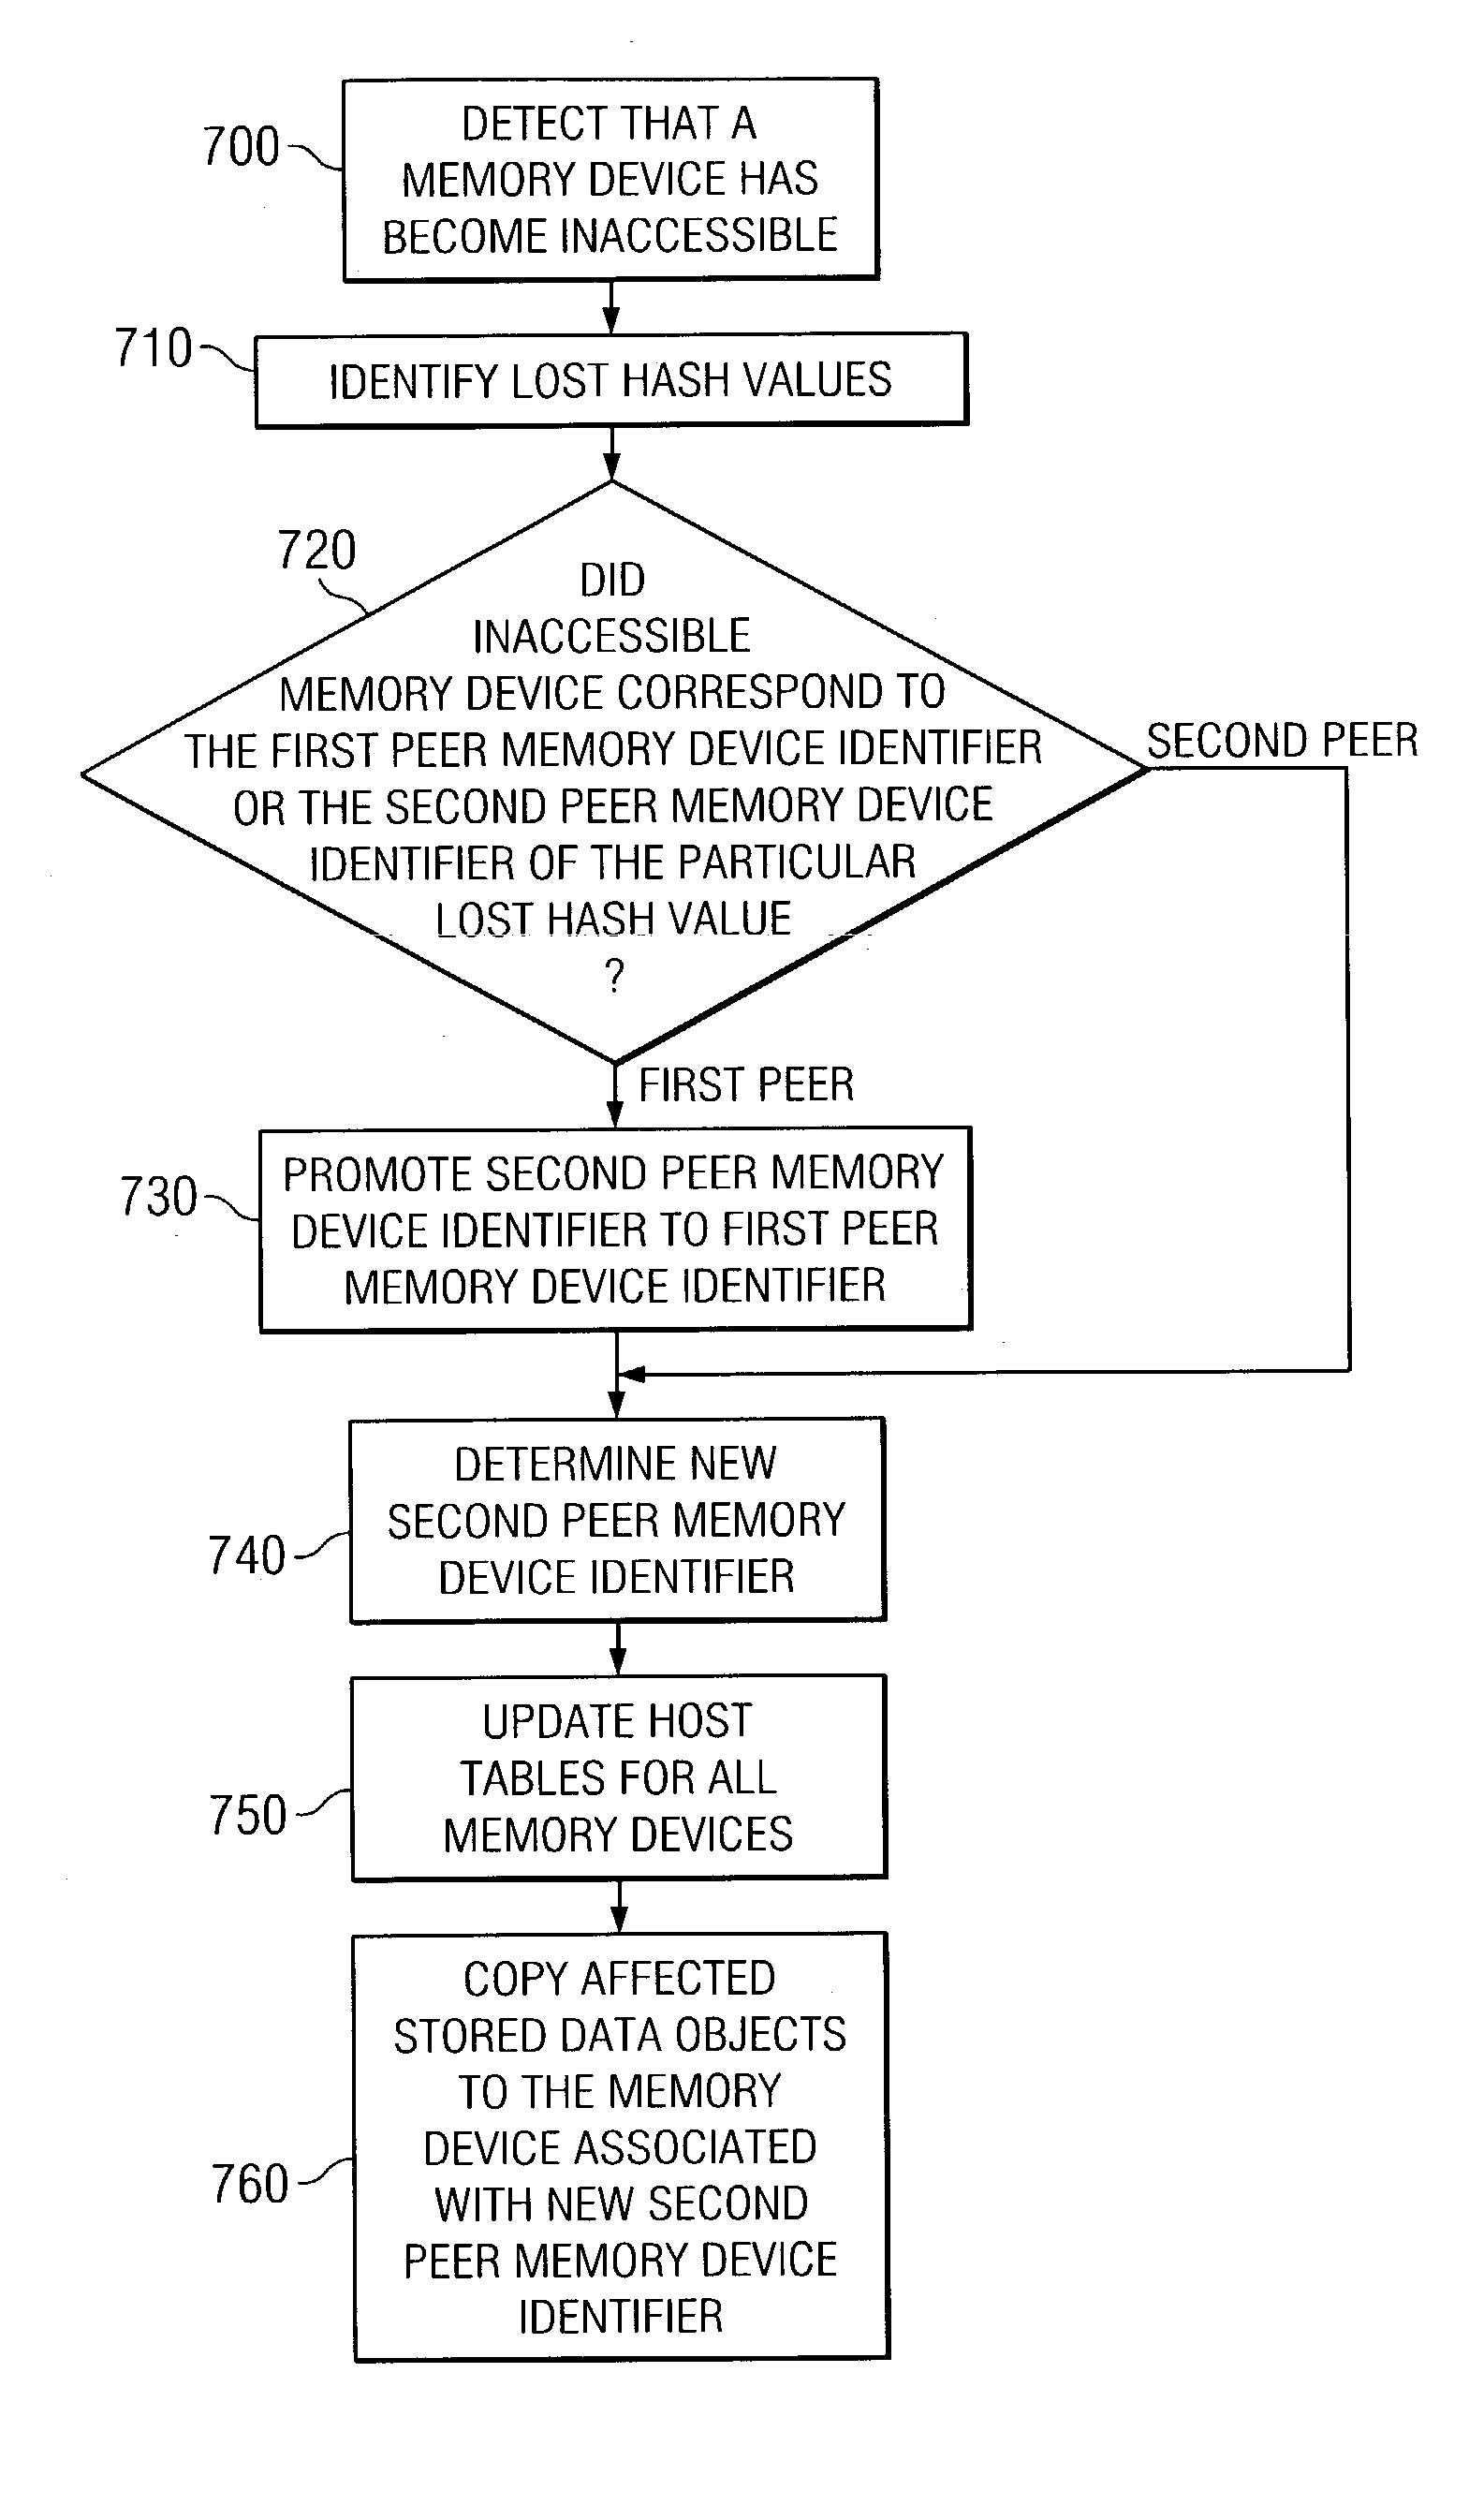 System and method for managing data in a distributed system